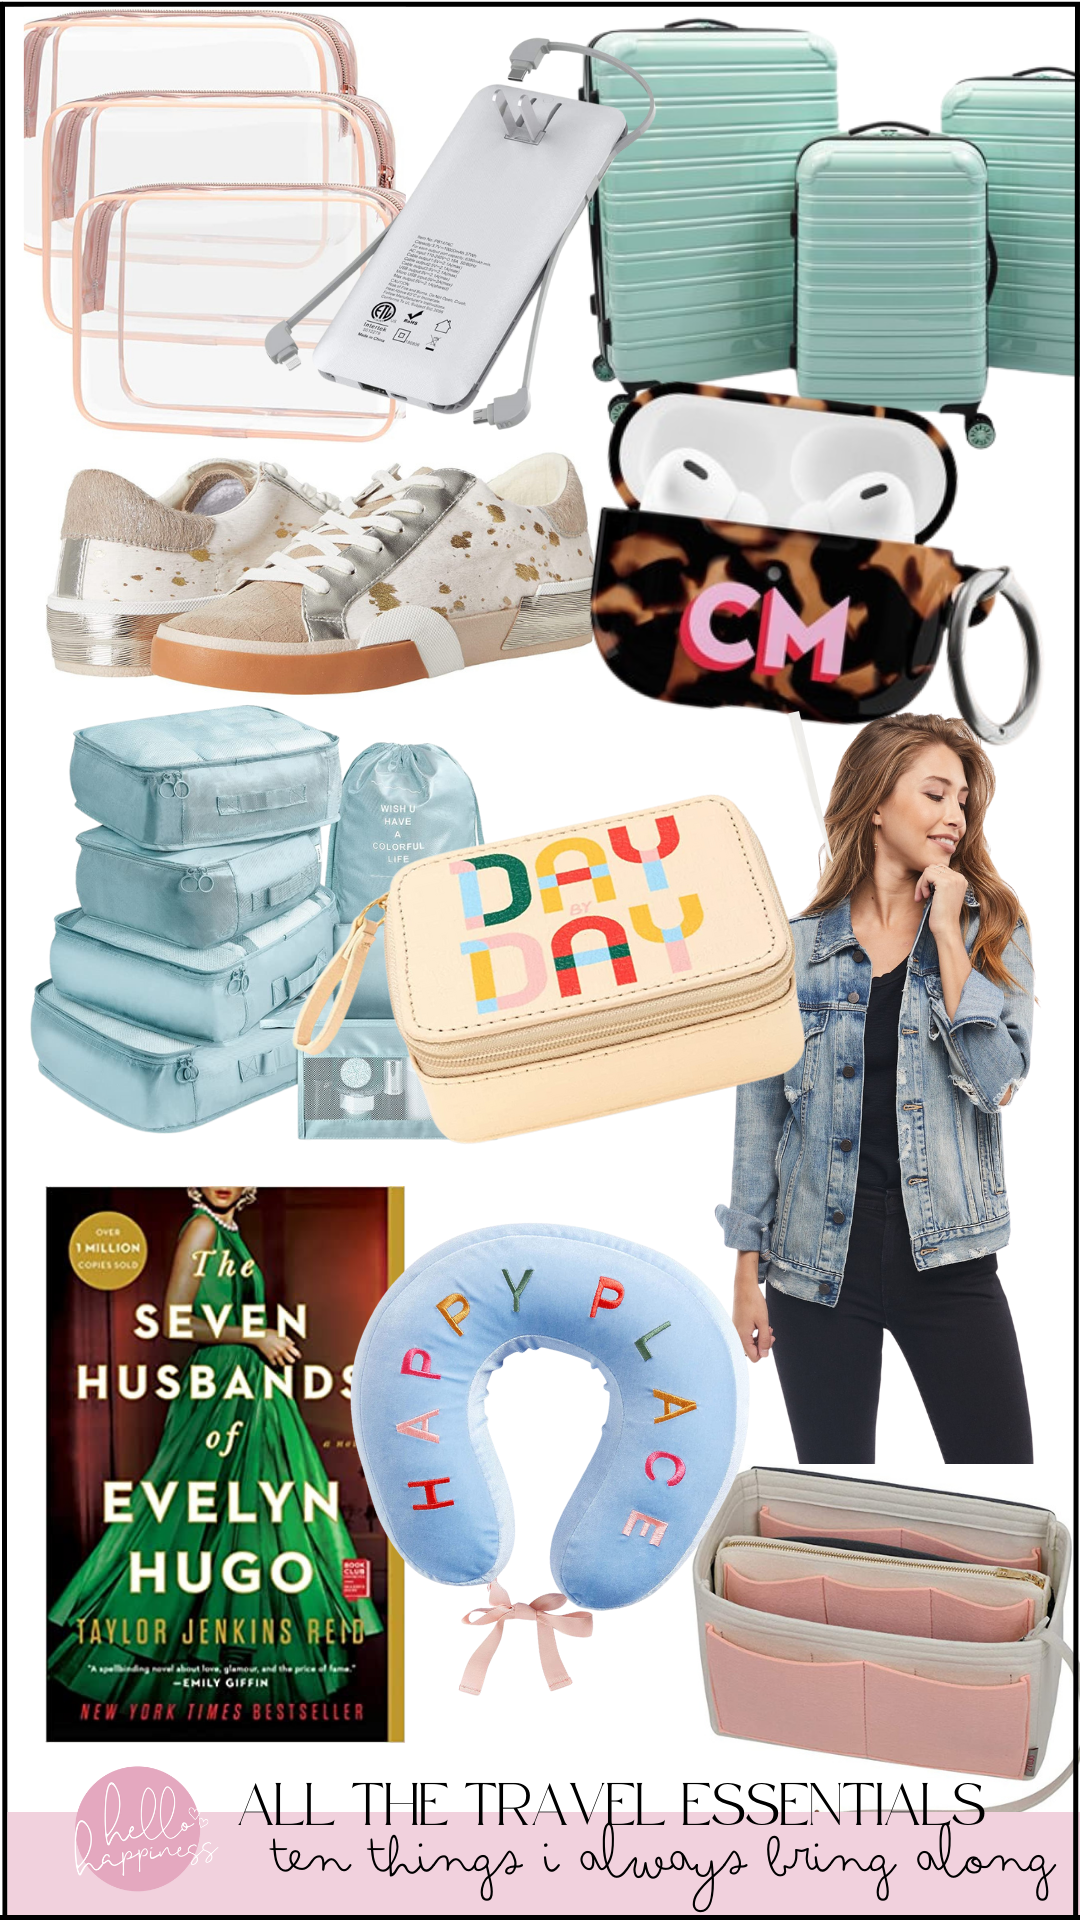 top 10 travel essentials for her featured by hello happiness.